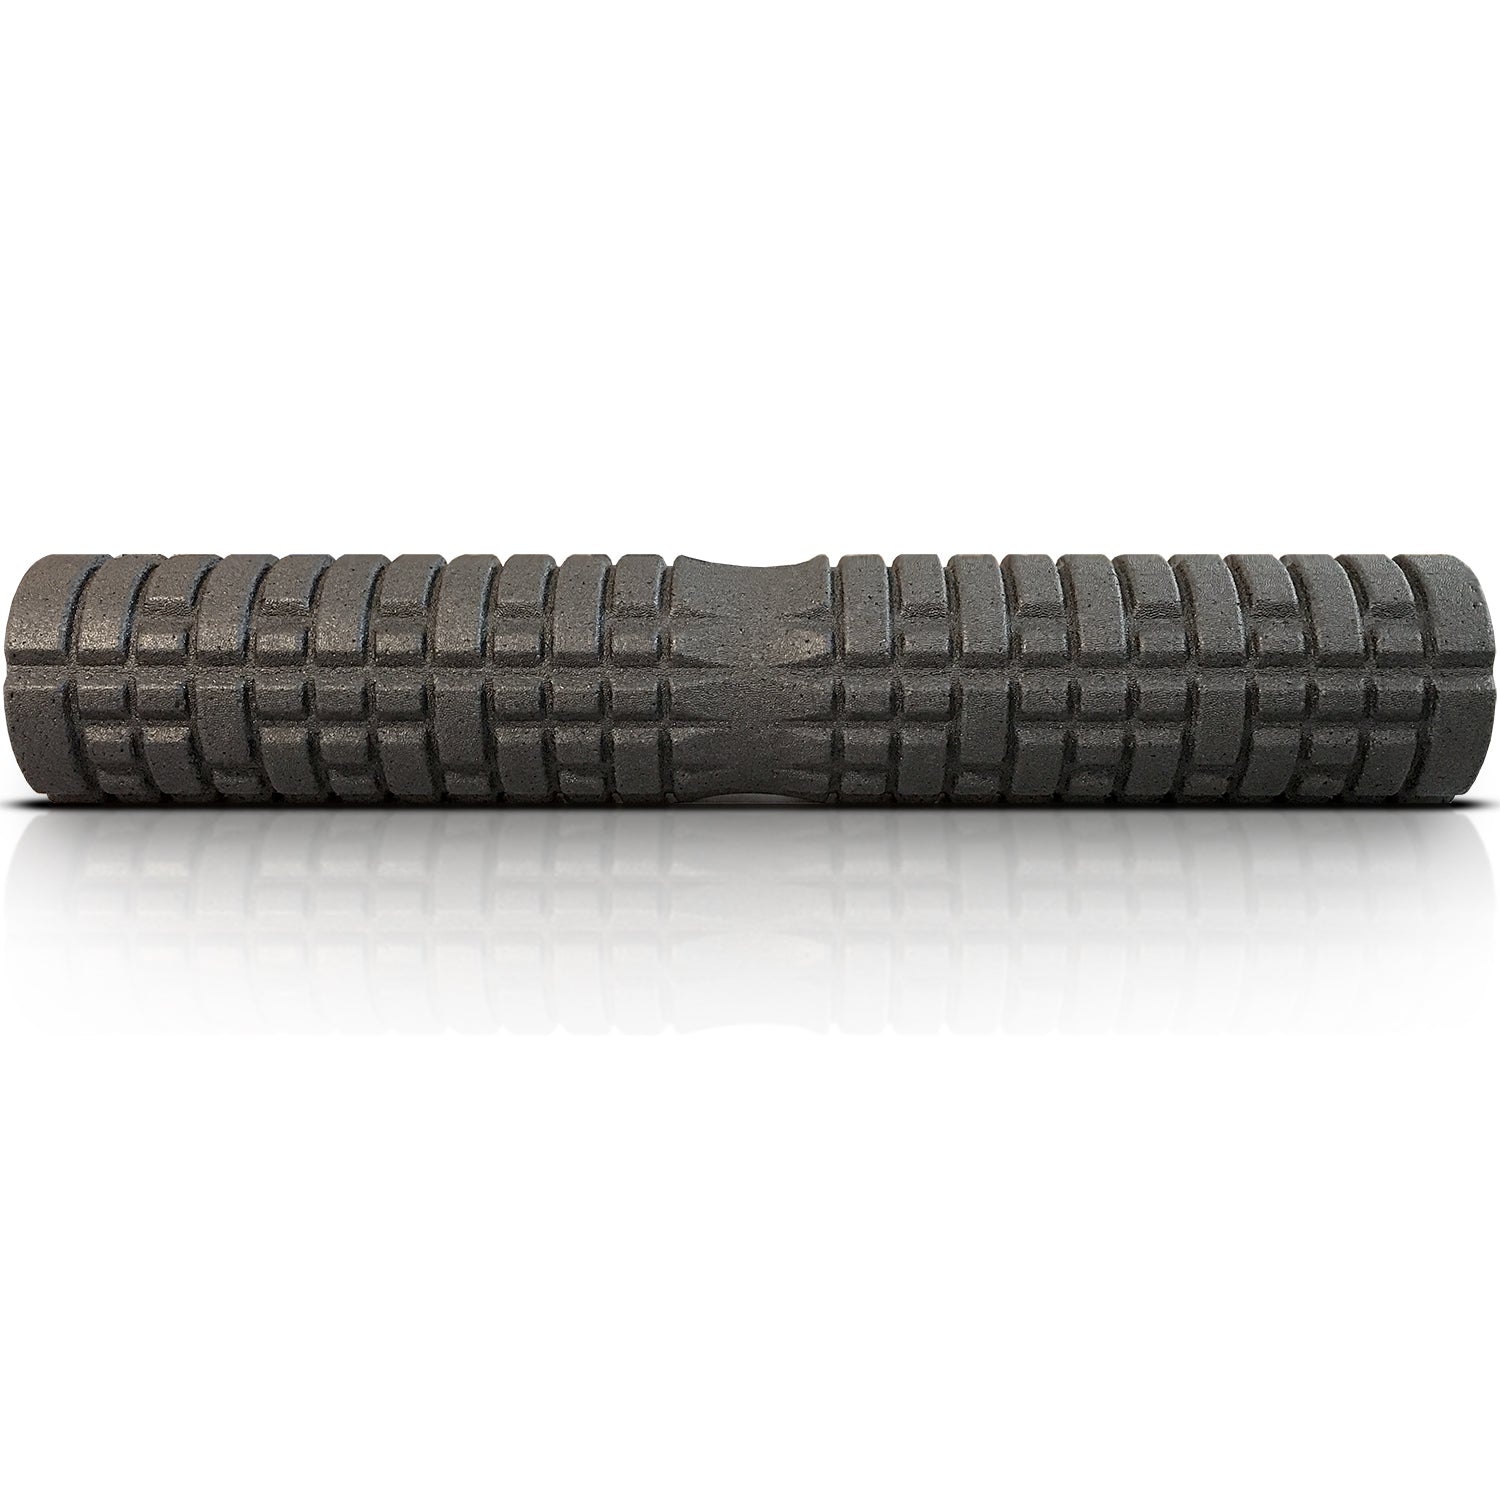 Foam Roller - 30 Inch High Density Deep Tissue Massager for Muscle Massage and Myofascial Trigger Point Release